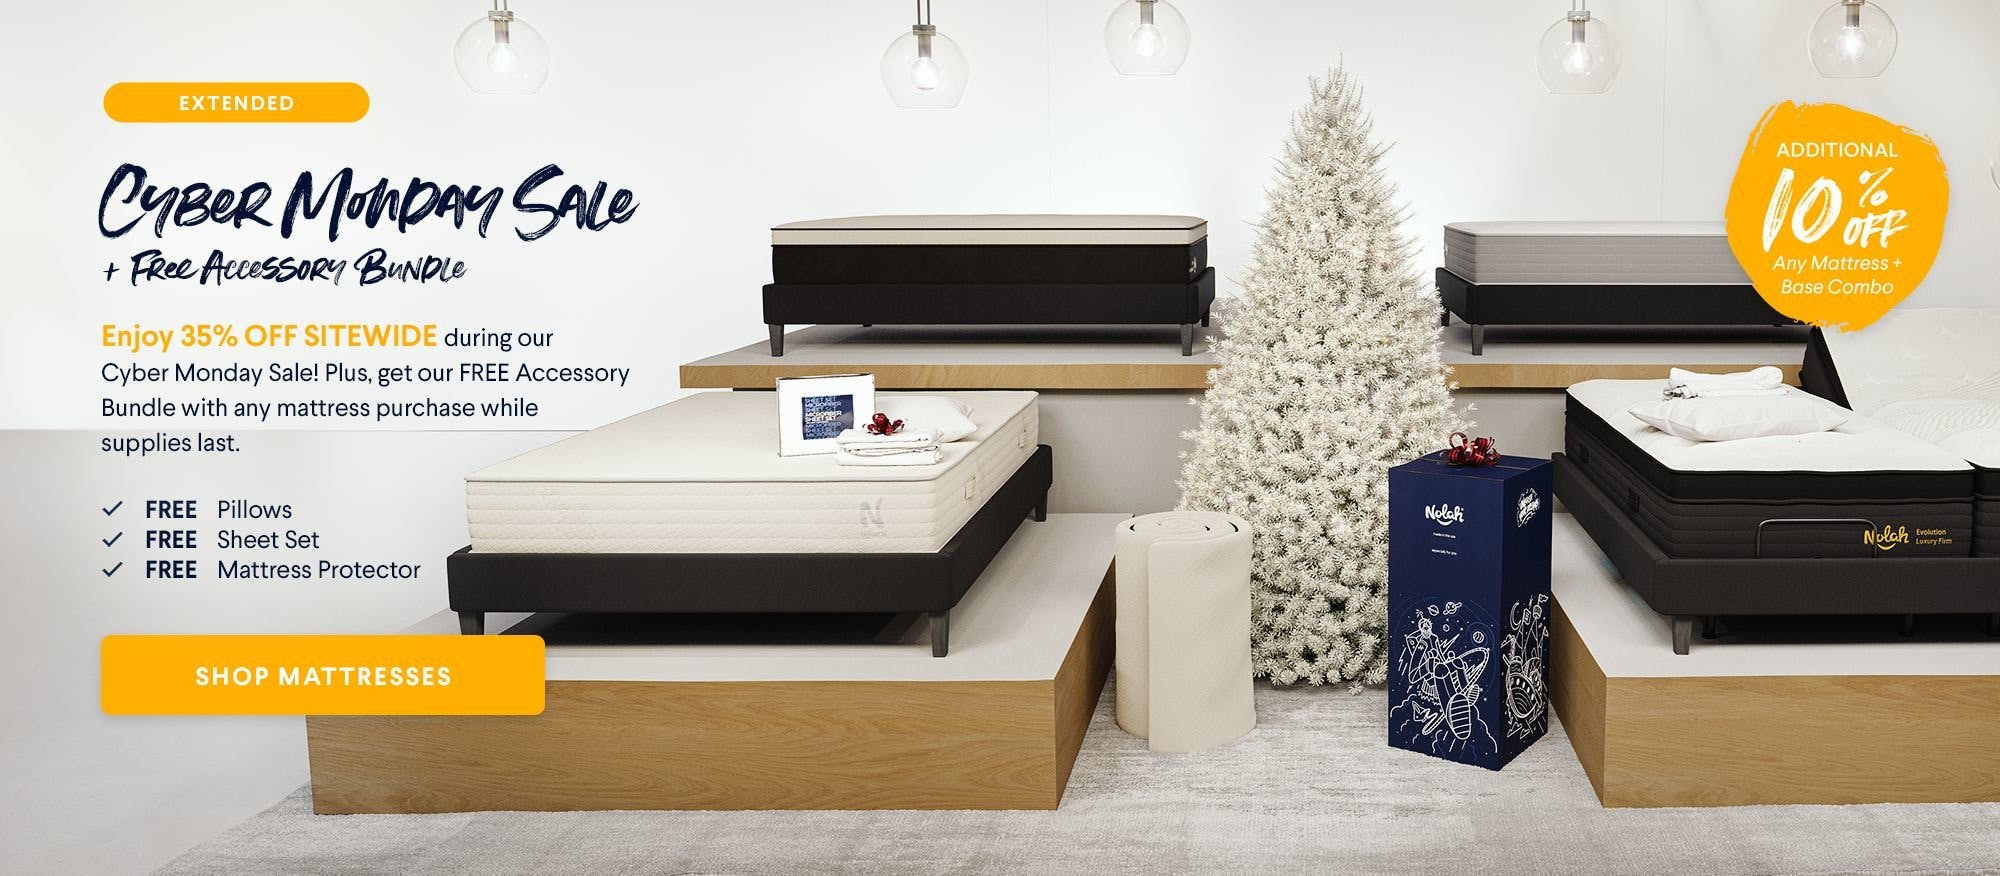 Cyber Monday Sale. Our biggest sale of the year. Take 35% Off sitewide. Up to $1000 in savings. Get 2 Fluffy Pillows with any mattress purchase.